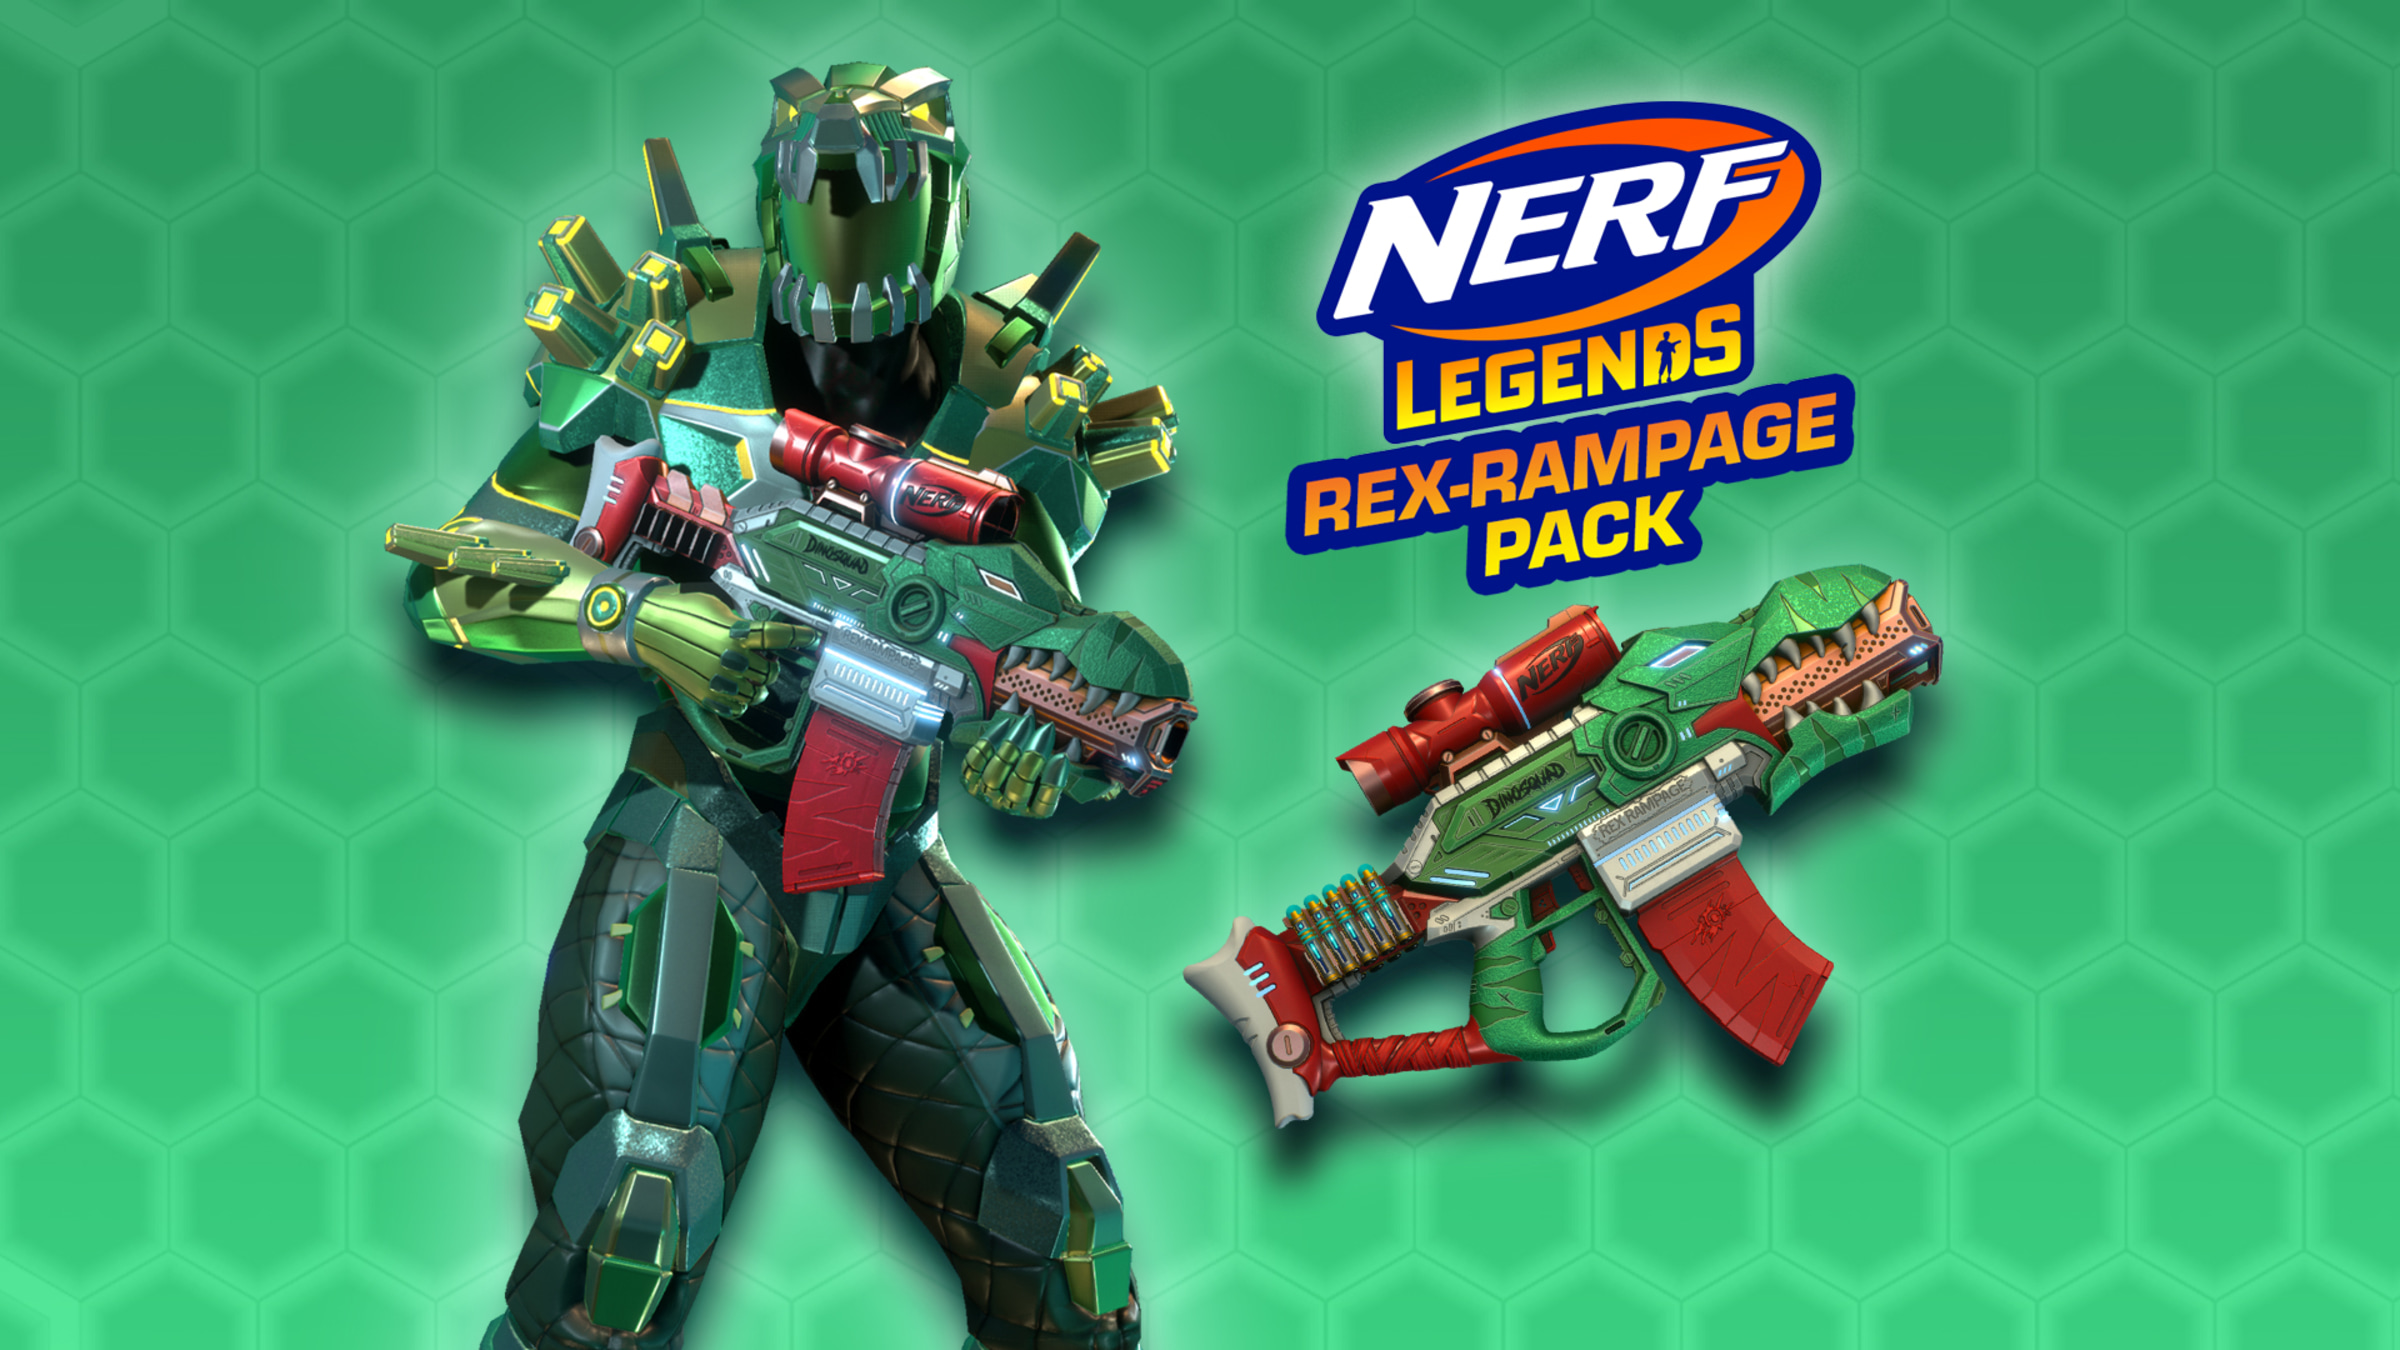 NERF Legends - Rex-Rampage Pack for Nintendo Switch